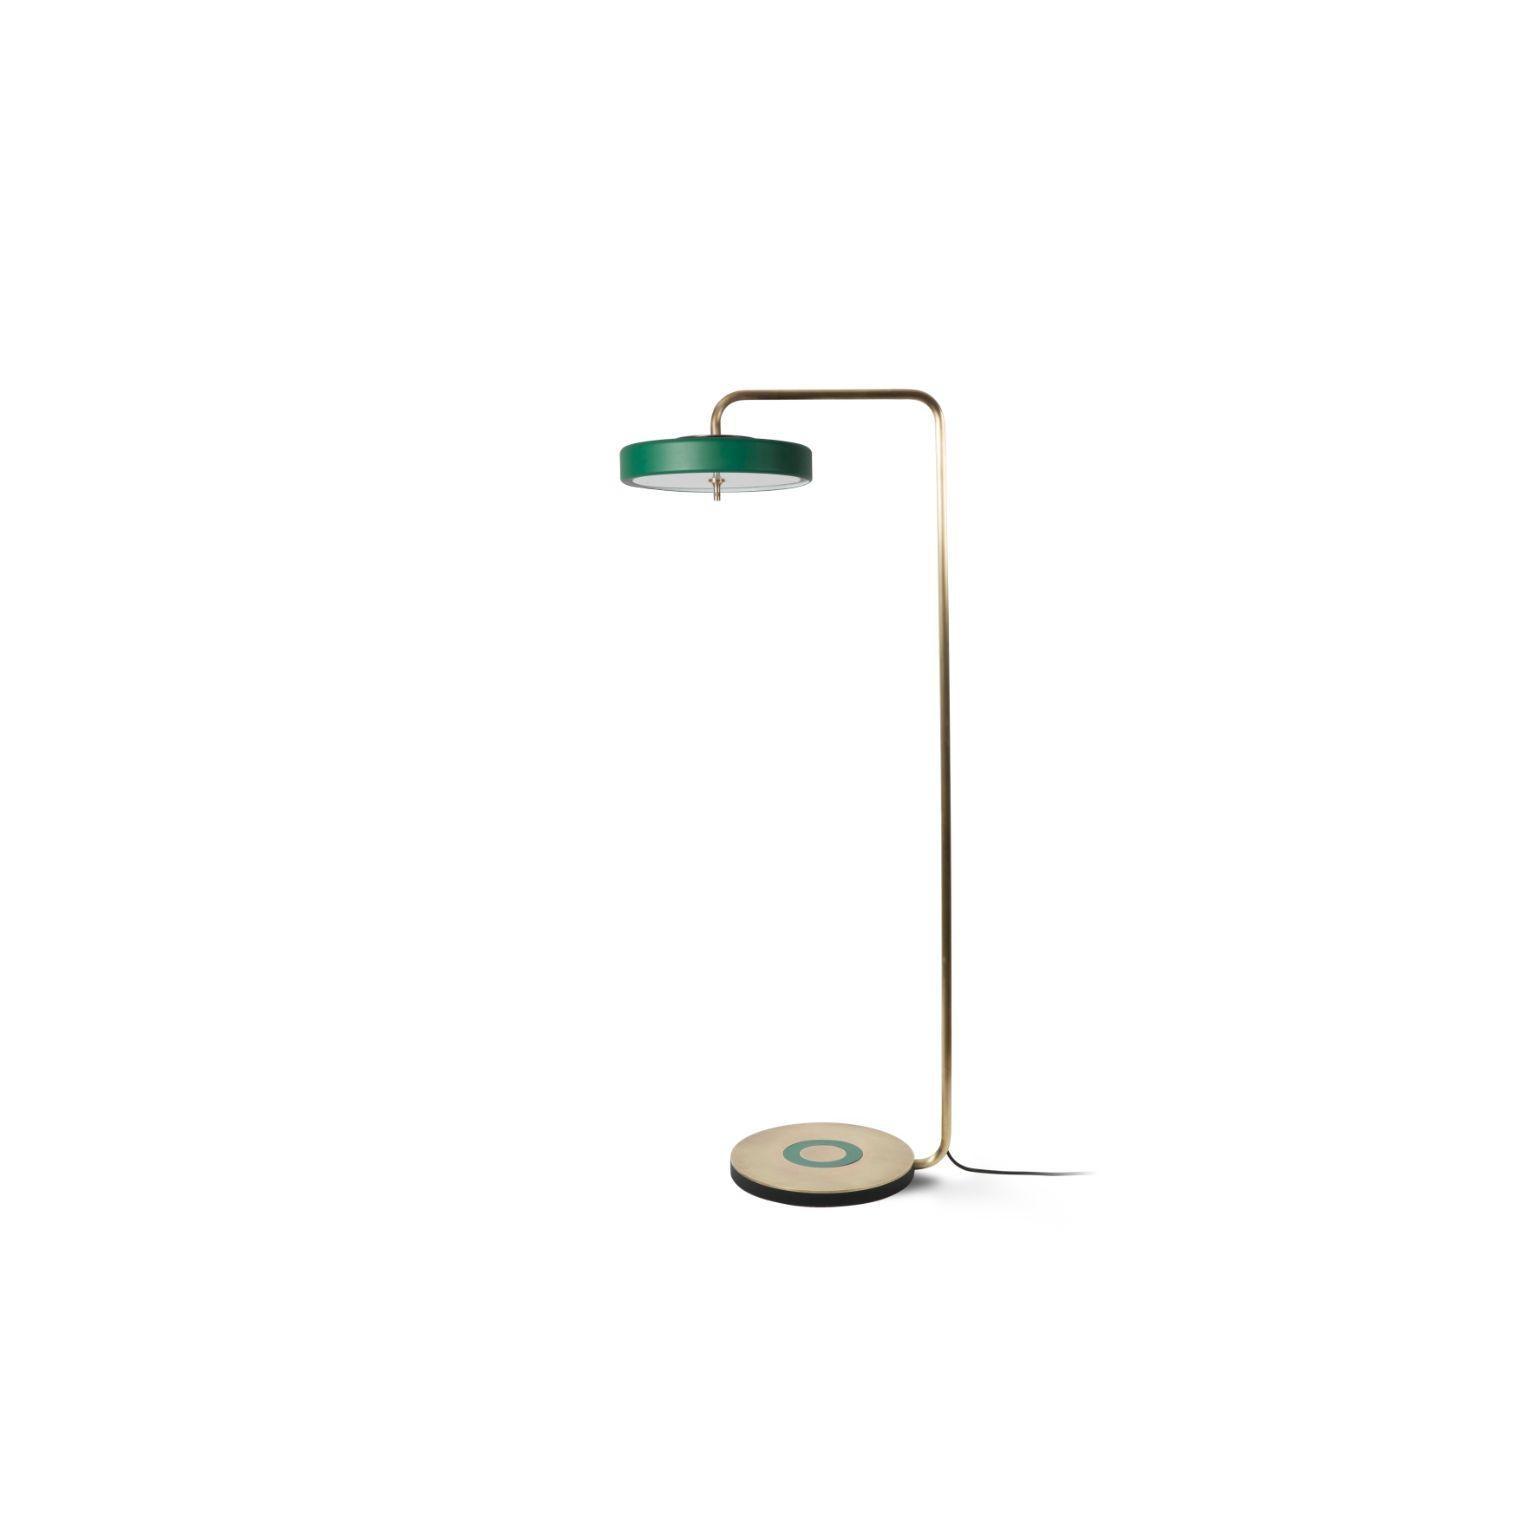 Revolve floor lamp - polished brass - green by Bert Frank
Dimensions: 130 x 35.4 x 9.3 cm
Materials: Brass, Steel

Also available in polished brass
When Adam Yeats and Robbie Llewellyn founded Bert Frank in 2013 it was a meeting of minds and